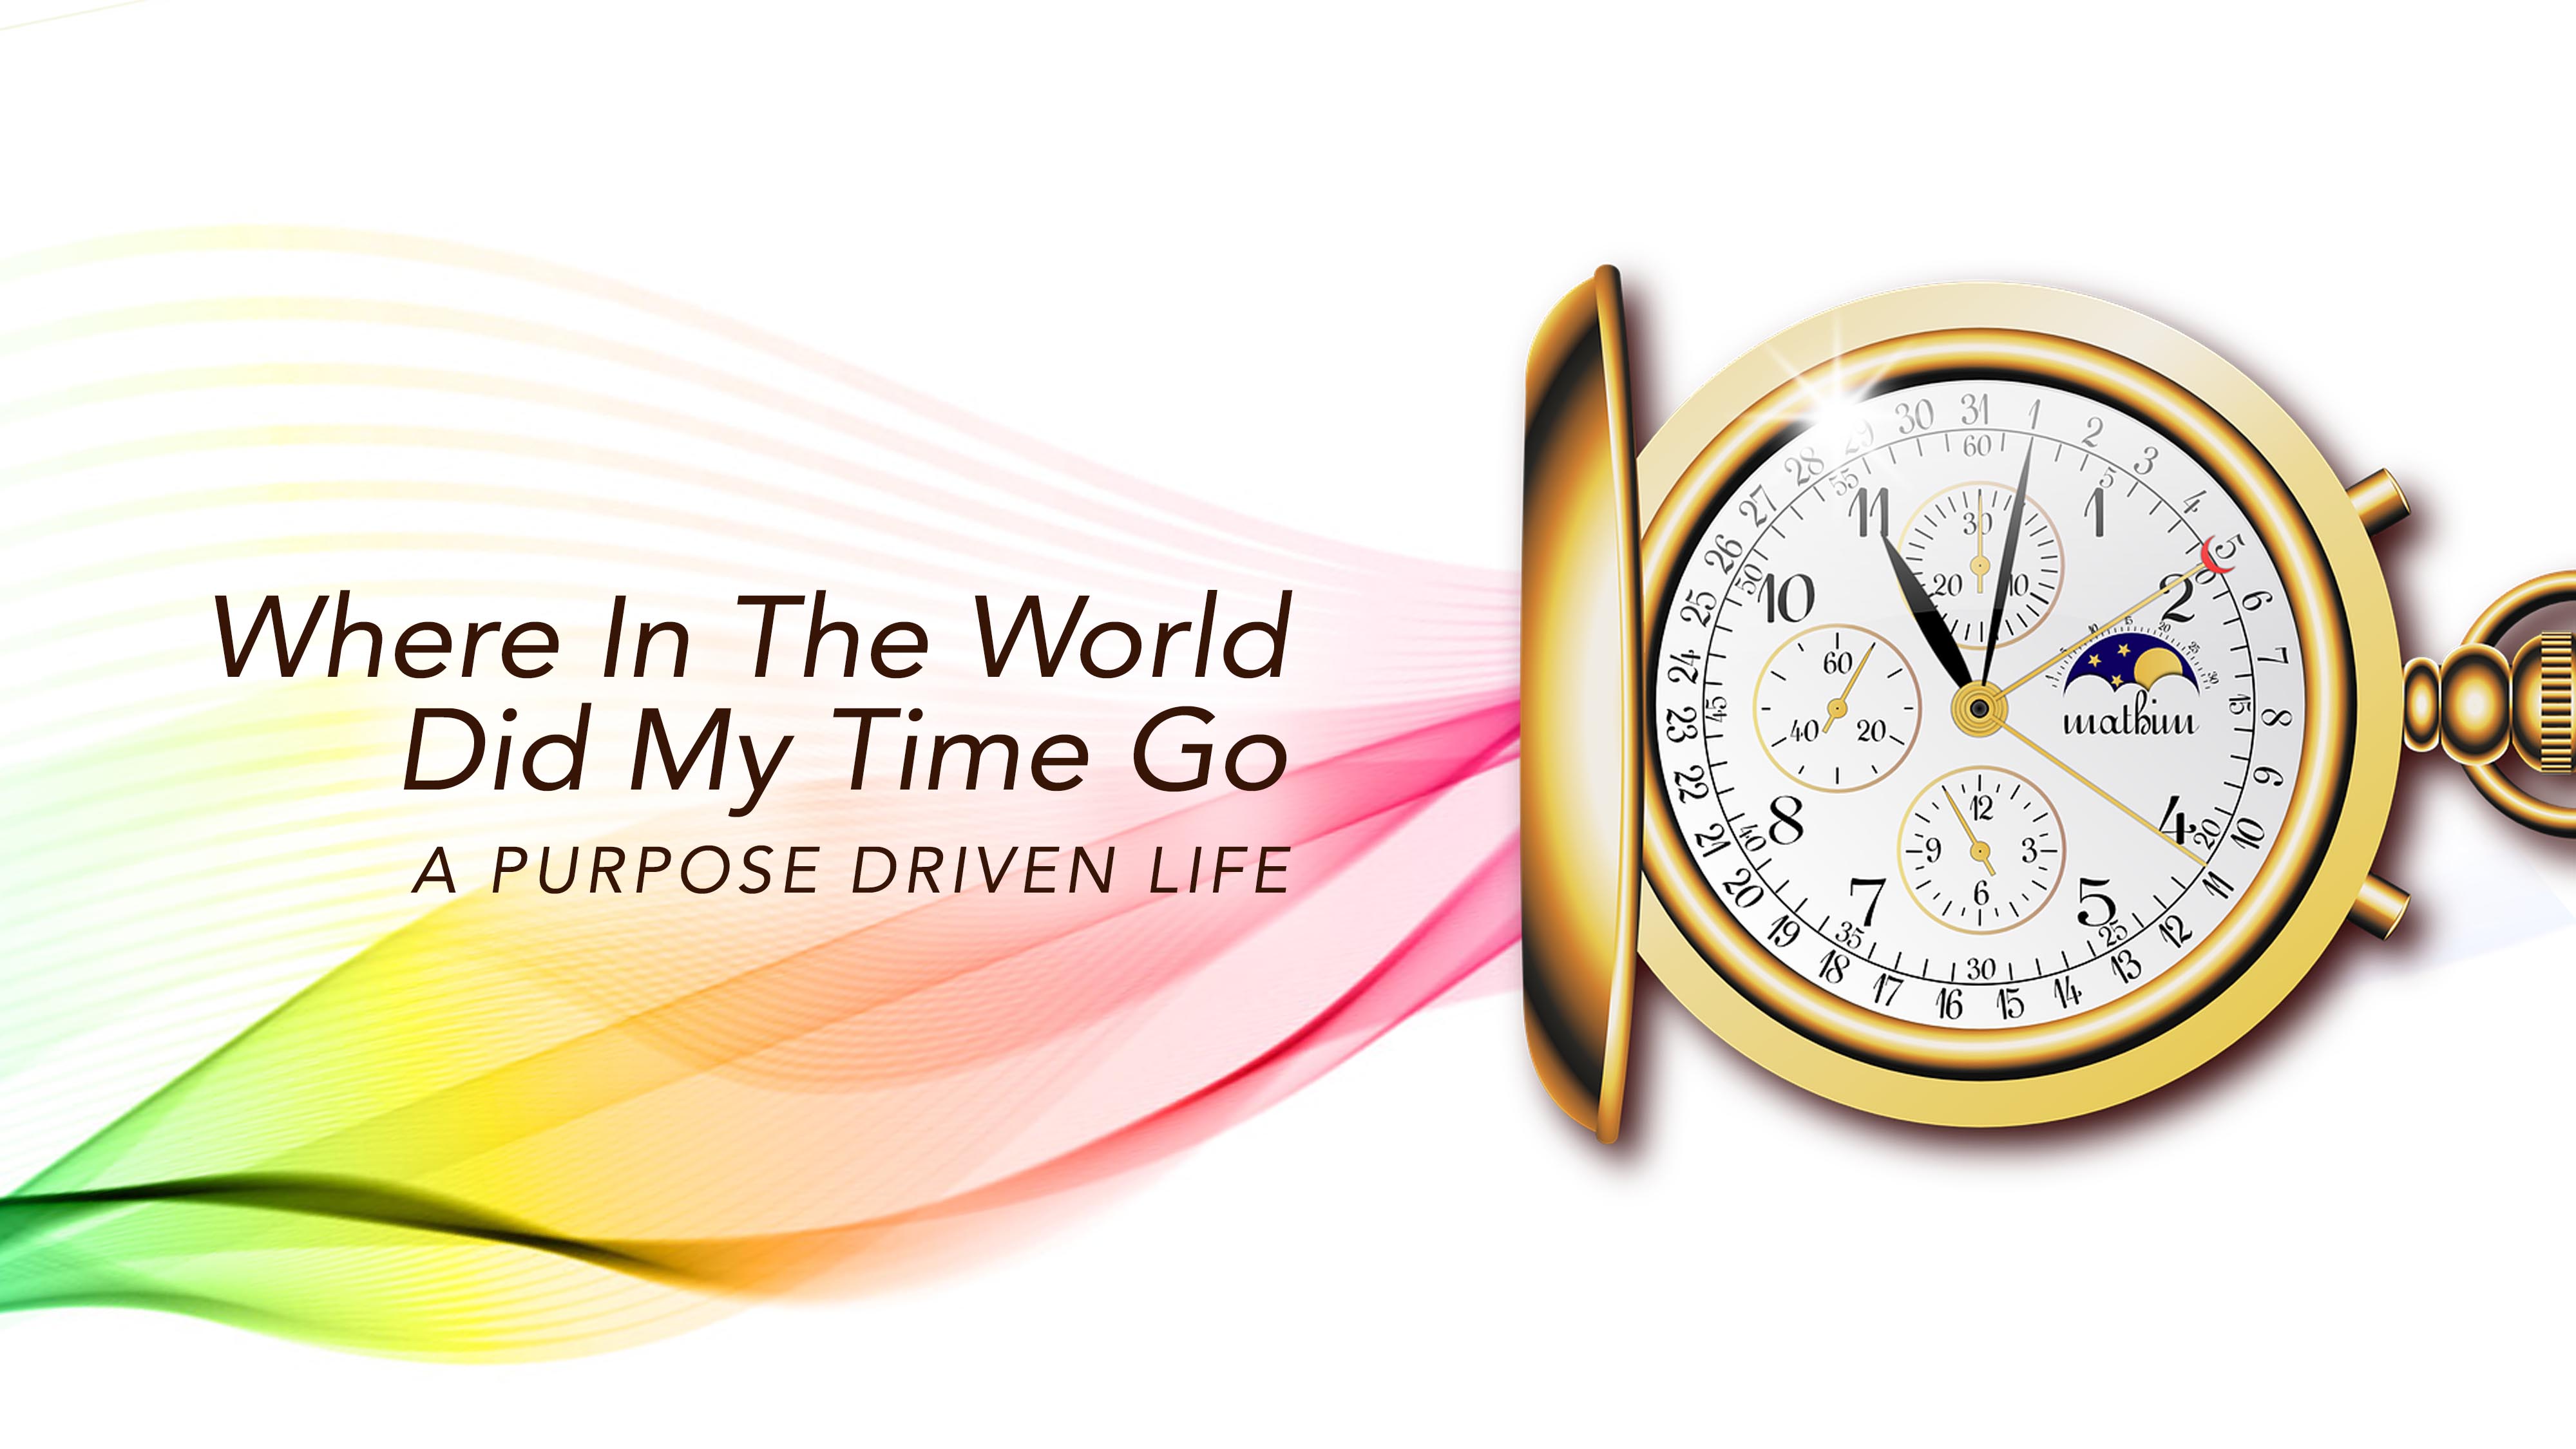 My Covenant The Purpose Driven Life Printable